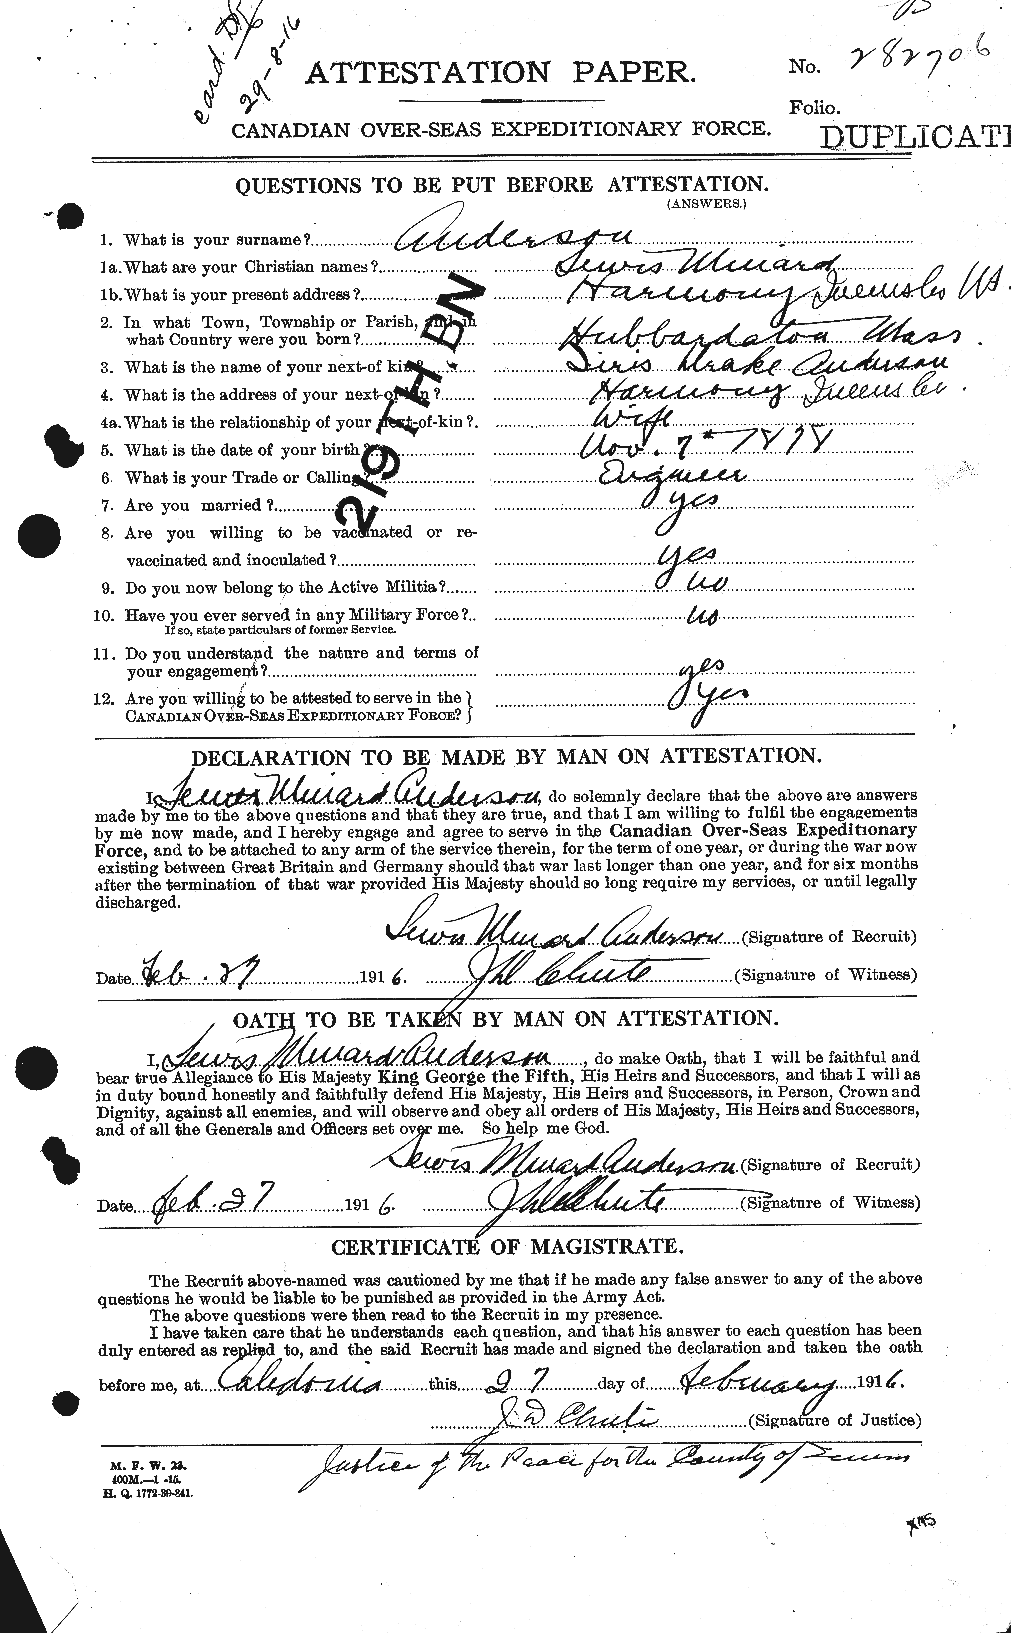 Personnel Records of the First World War - CEF 207518a